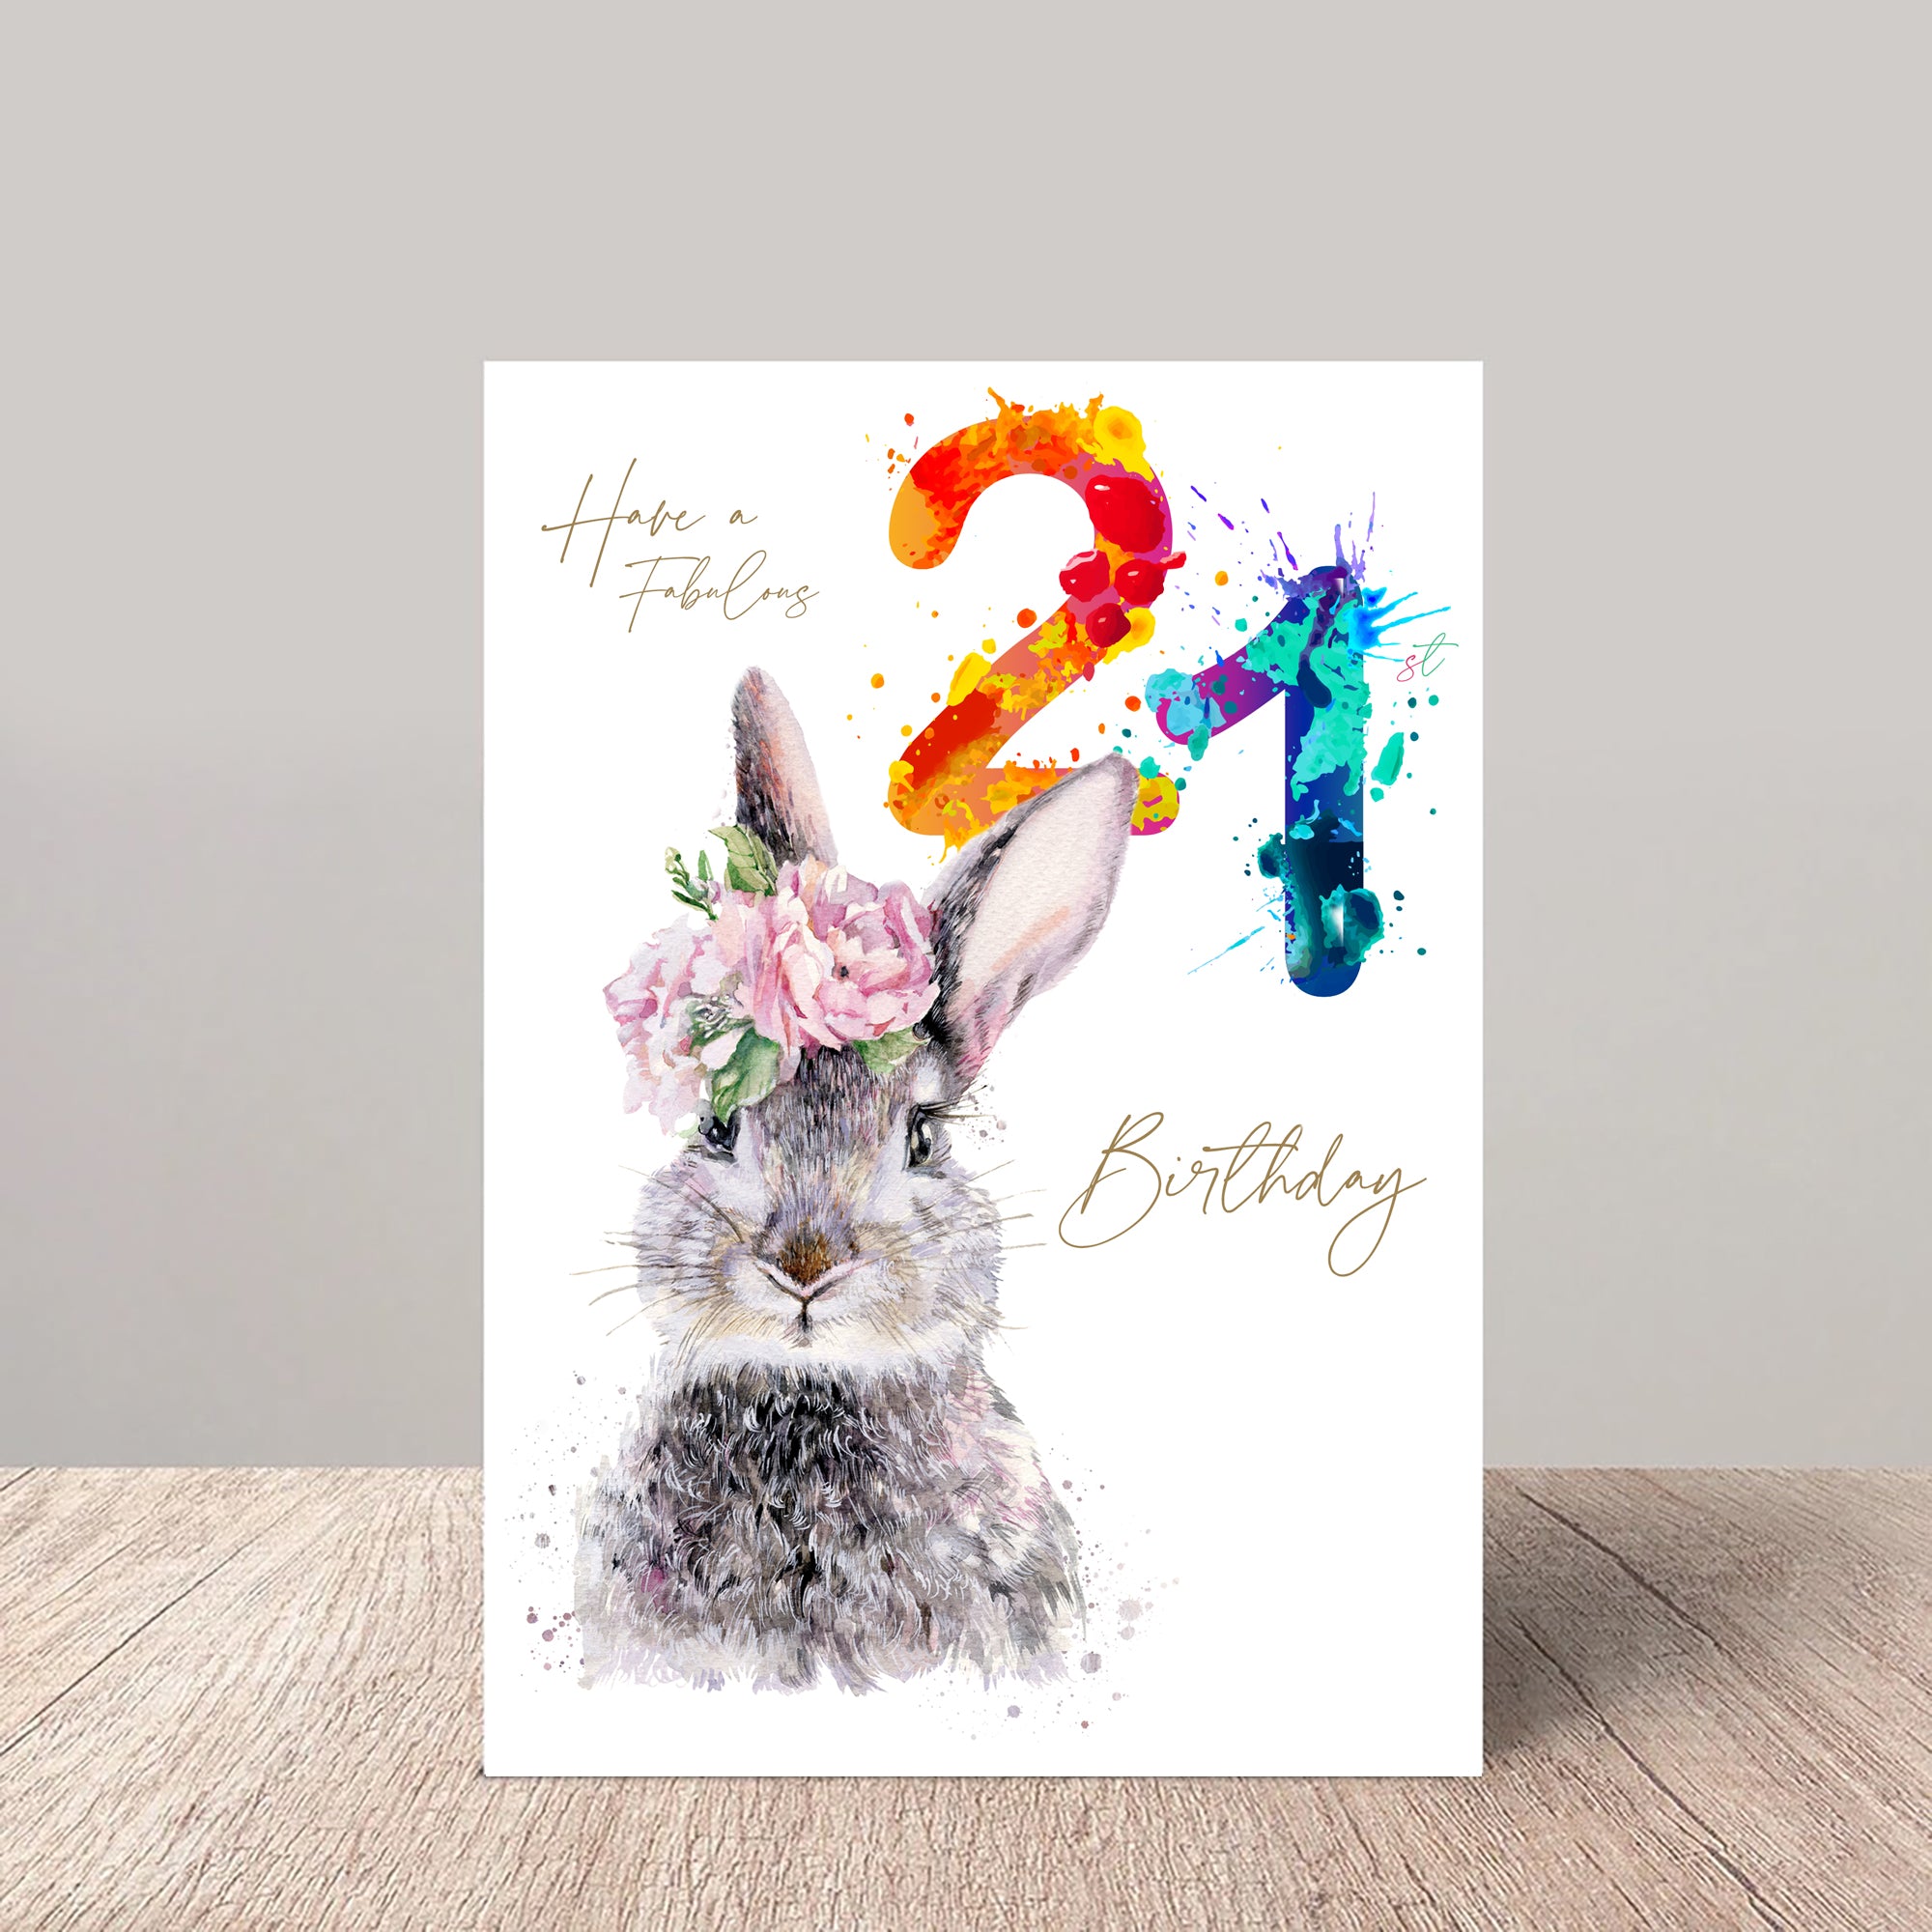 Fabulous 21st Birthday Card Floral Hare